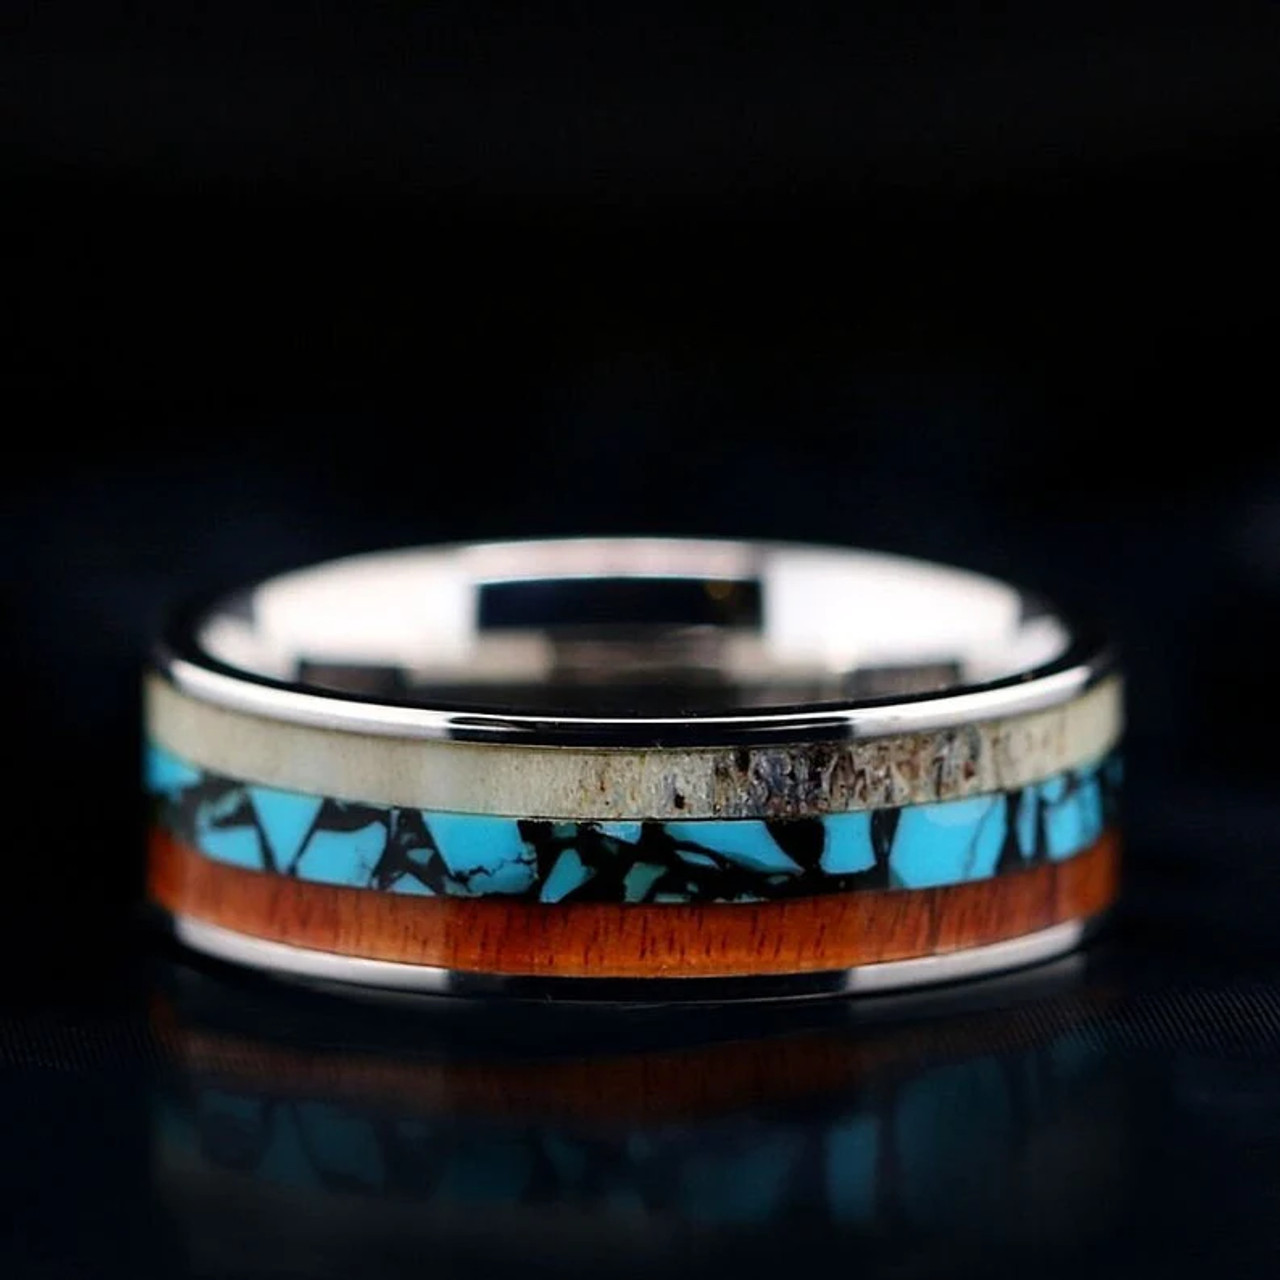 (8mm) Unisex or Men's Titanium Wedding Ring Band. Silver band with Triple Color Turquoise, Wood and Antler Inlay. Light Weight and Comfort Fit. 